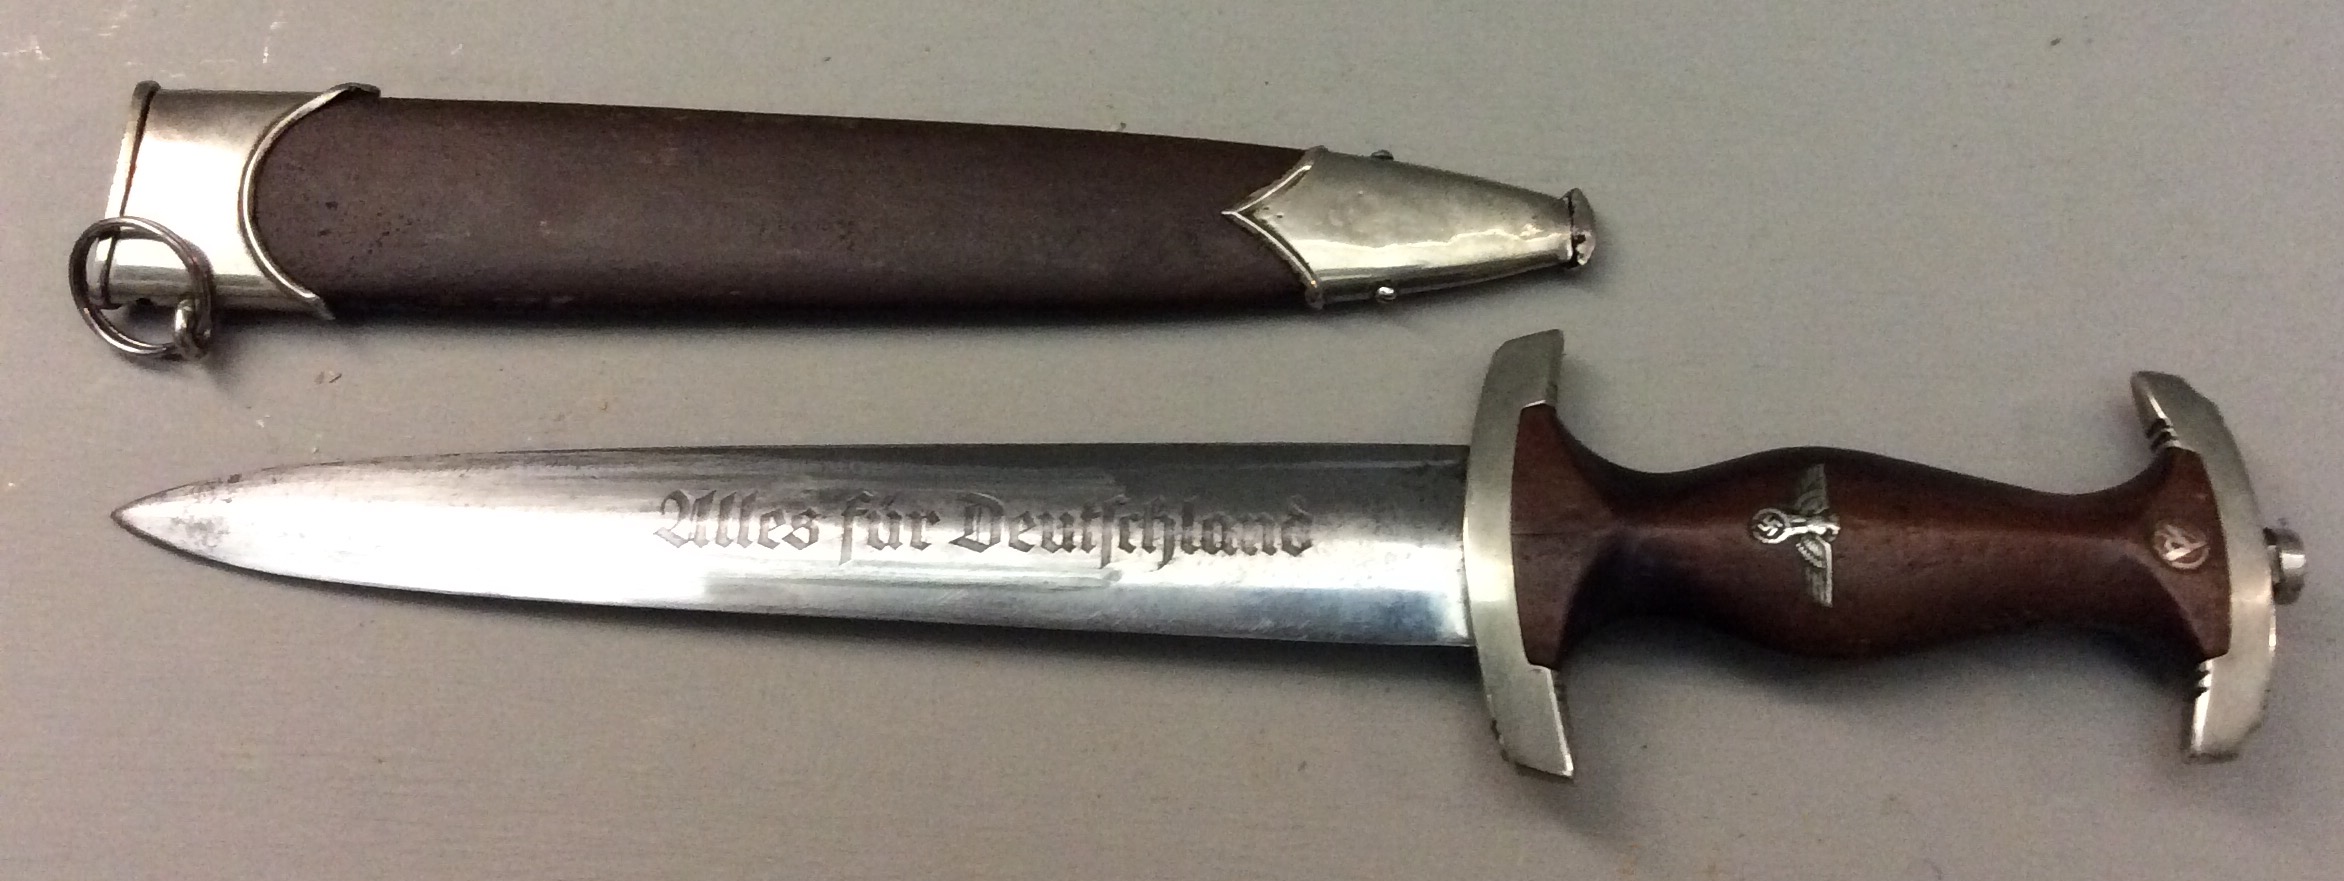 A WORLD WAR II GERMAN SA DAGGER Brown wooden grip with solid nickel fittings and brown leather - Image 9 of 10